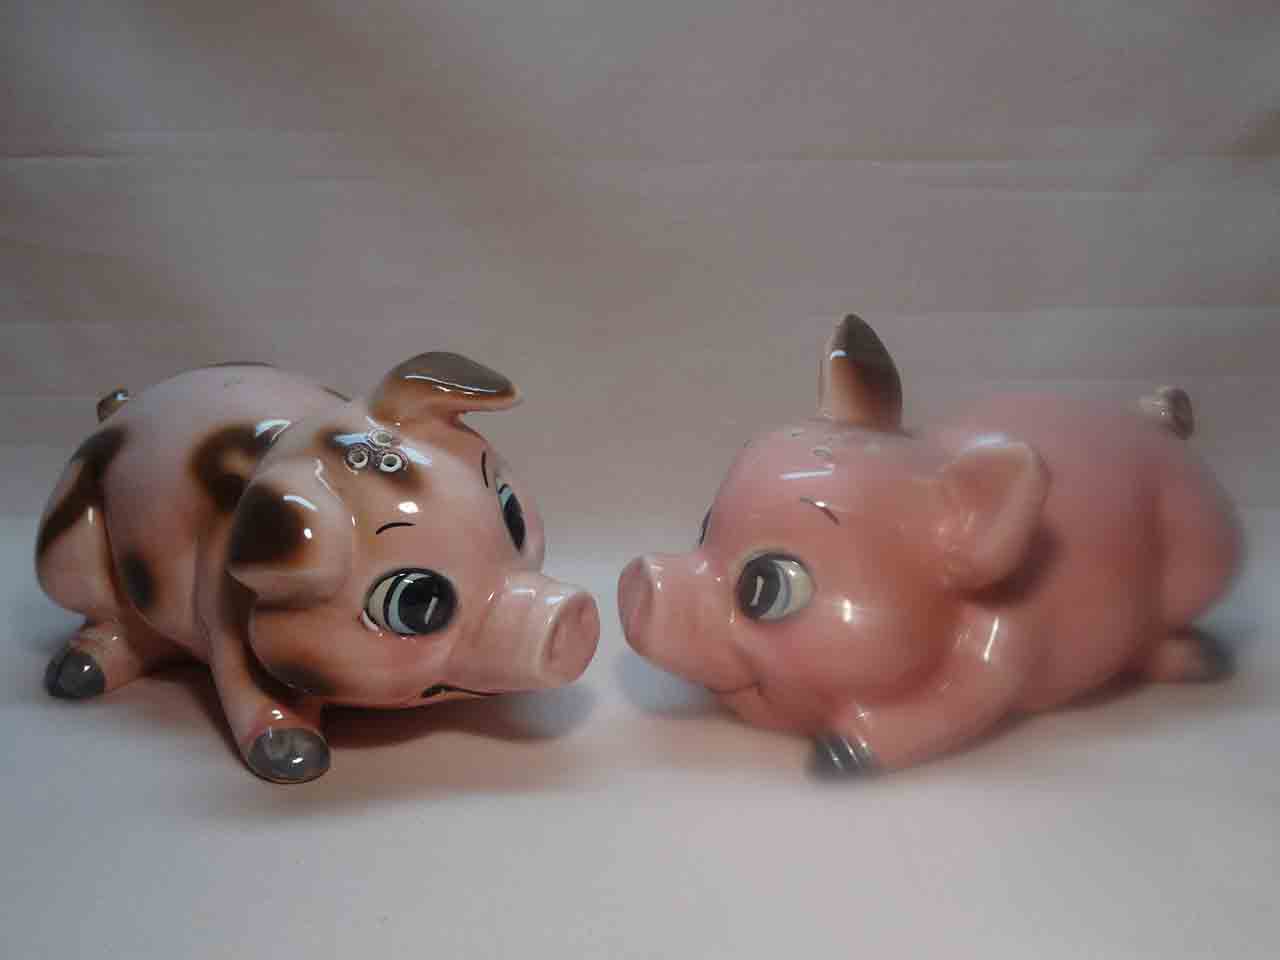 Kreiss animals salt and pepper shakers - large pigs